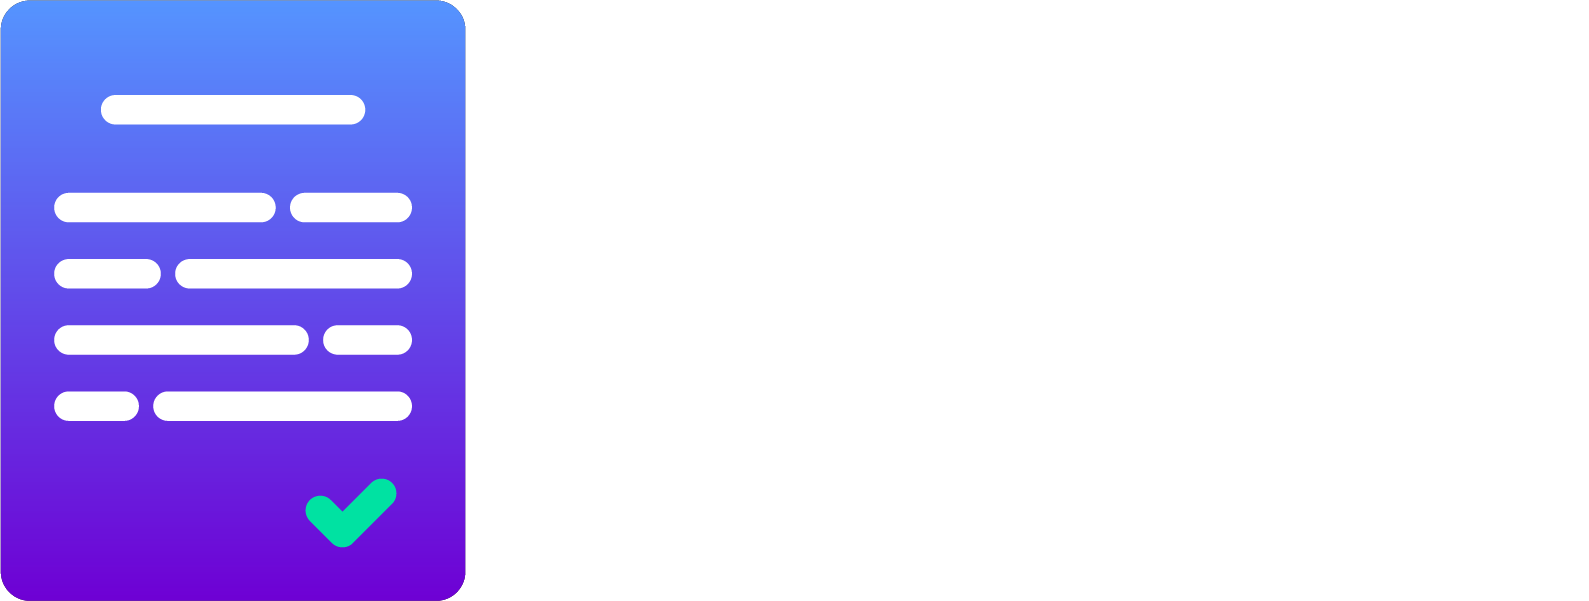 WP Terms Popup